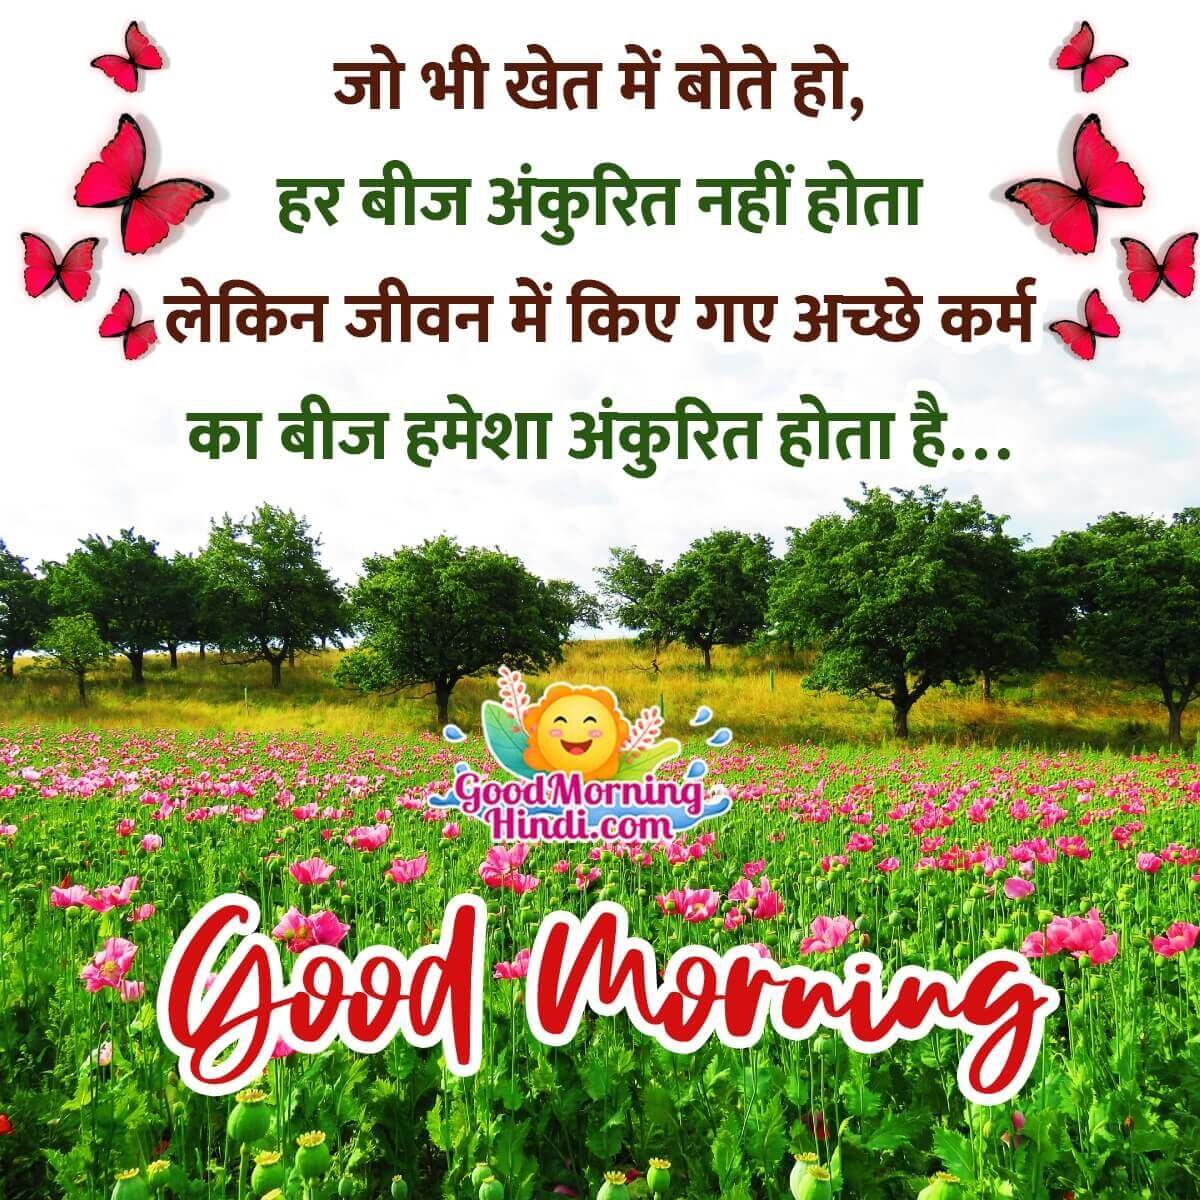 Good Morning Hindi Thoughts Images - Good Morning Wishes & Images ...